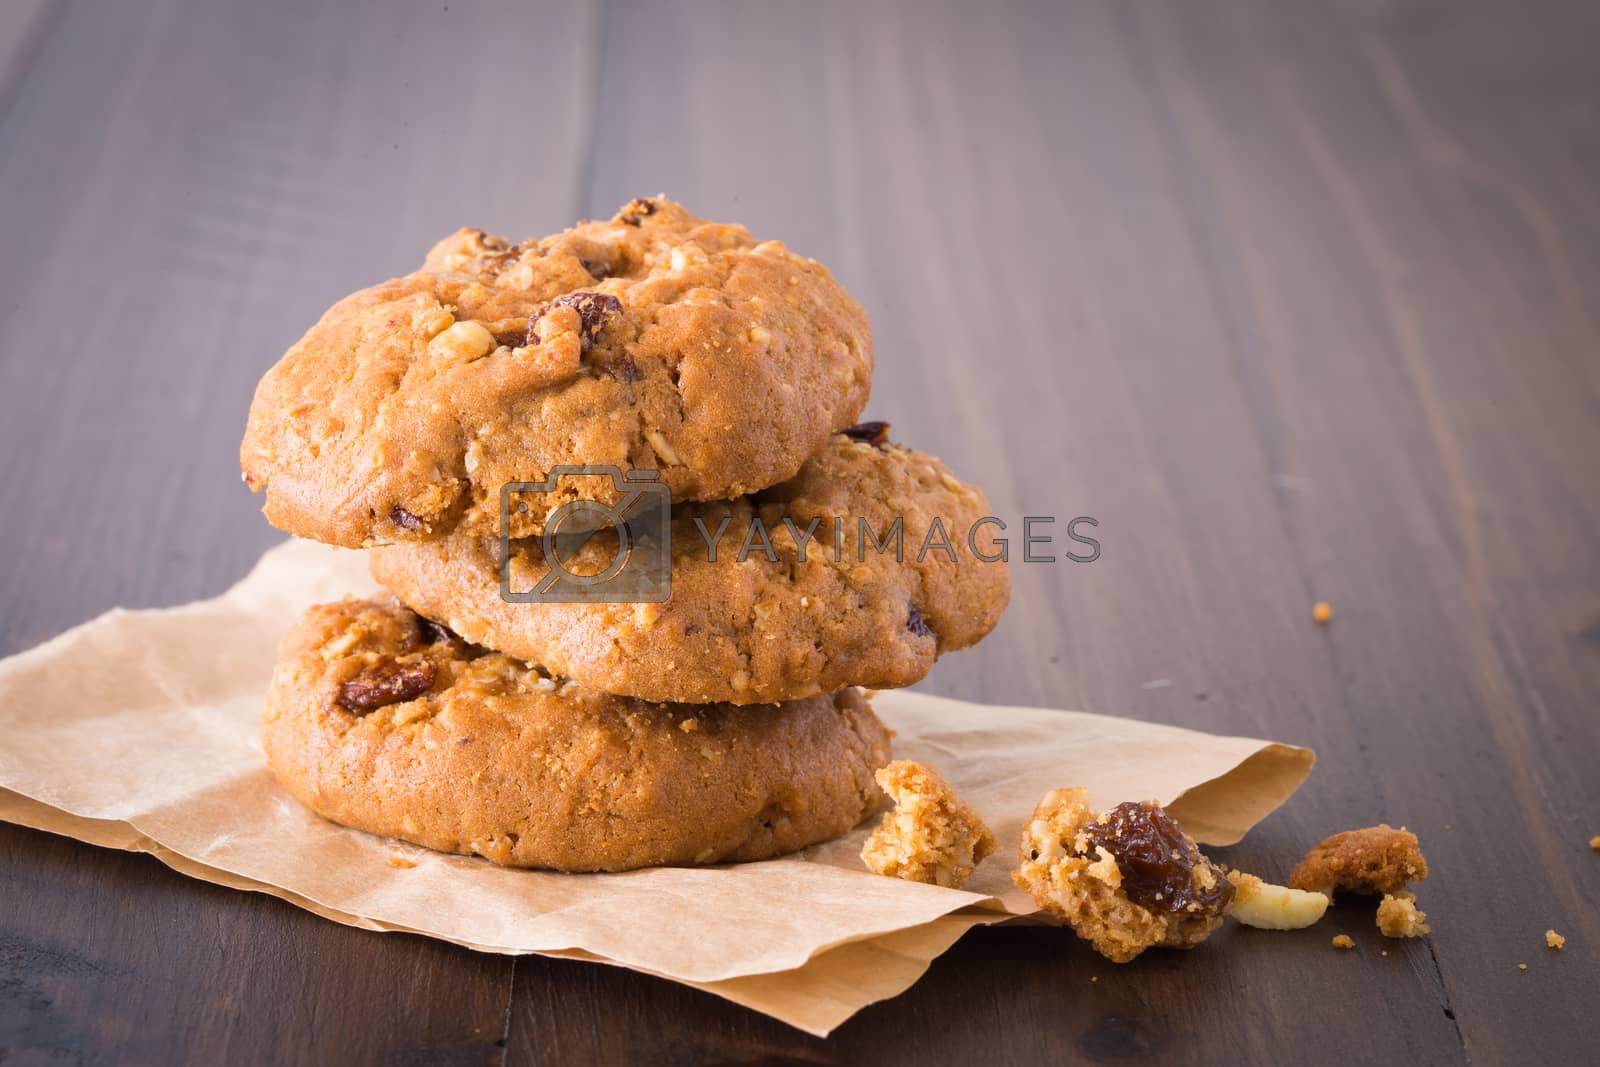 Royalty free image of Chocolate Raisin Cookies by boar26